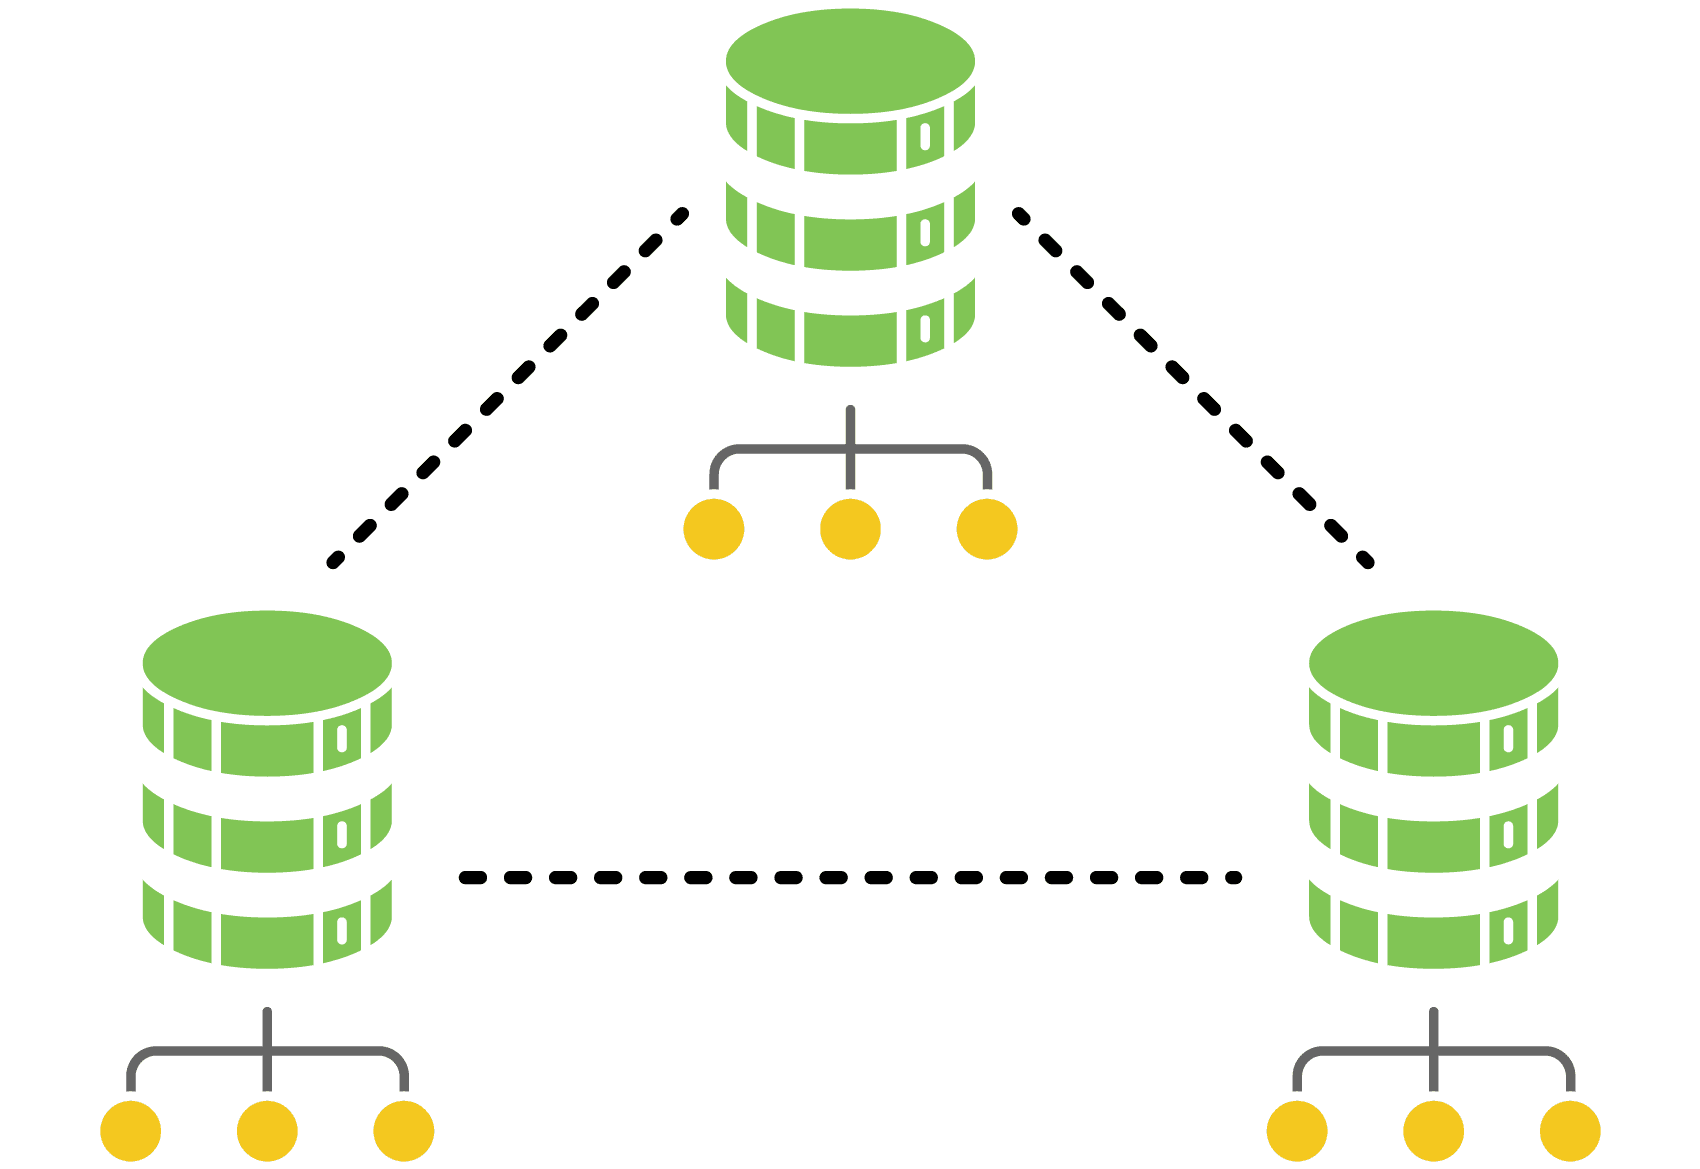 Illustration depicting a flexible, scalable architecture